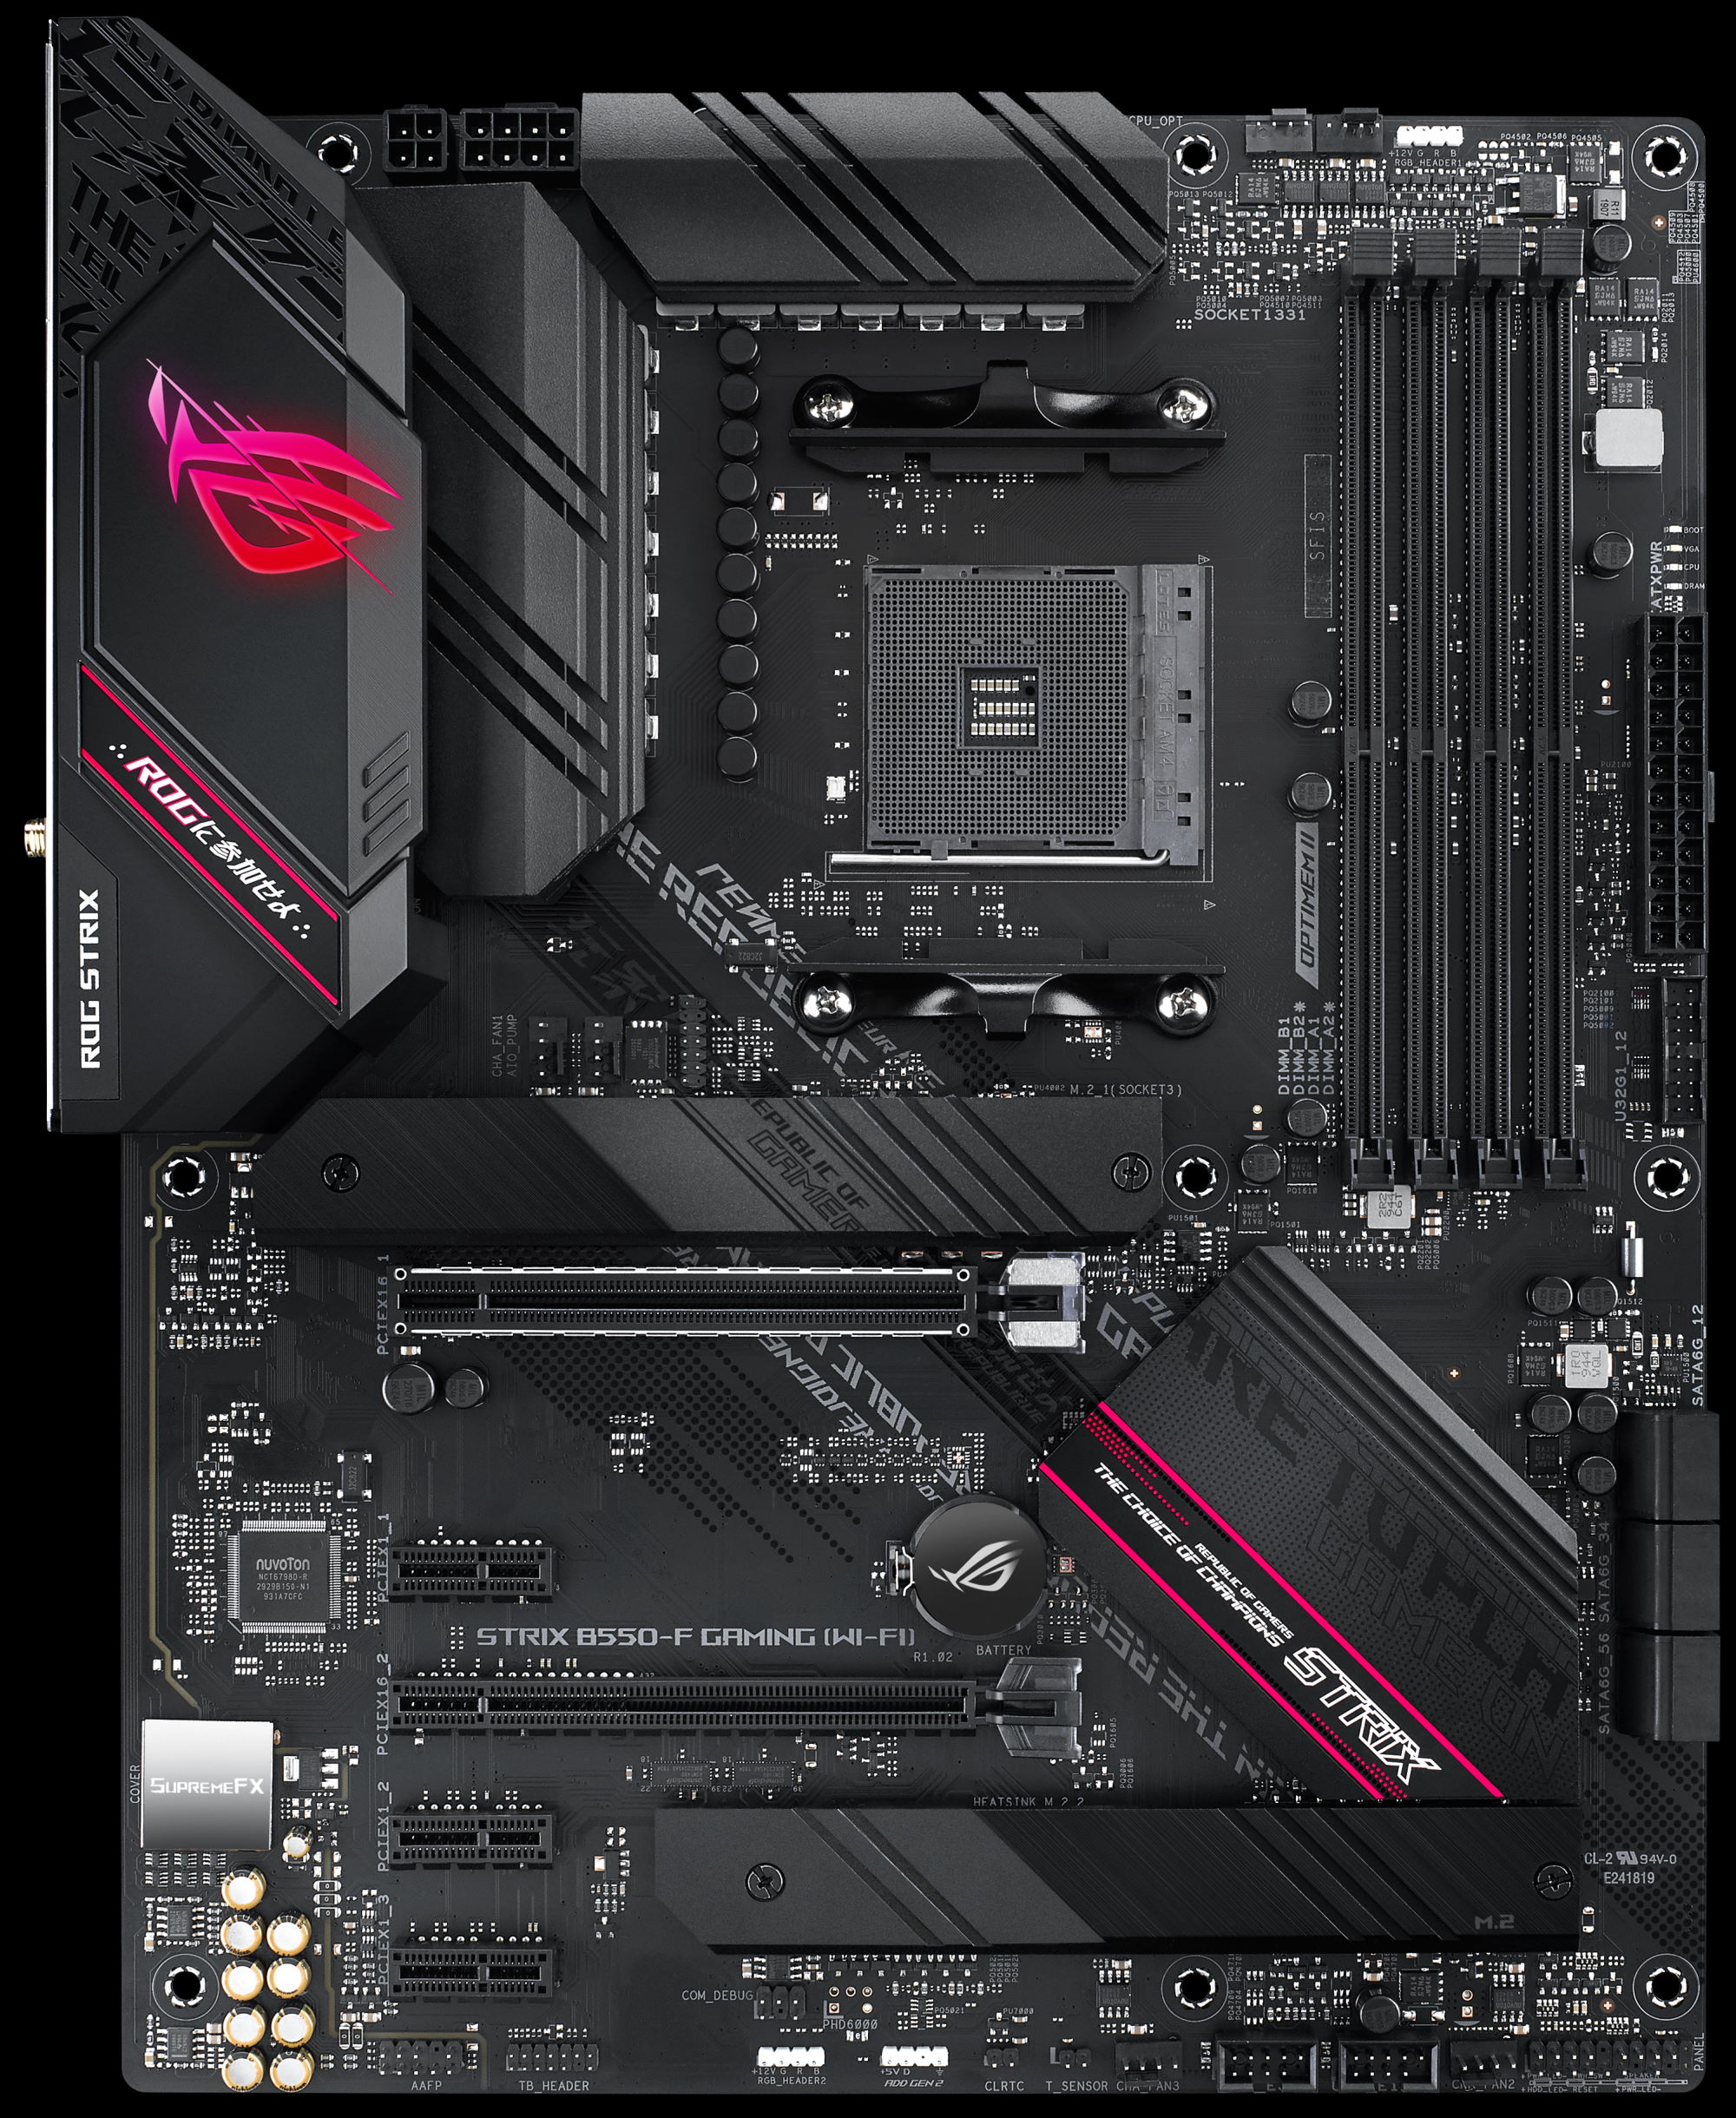 ROG Strix B550 motherboards power up mainstream AMD gaming builds 